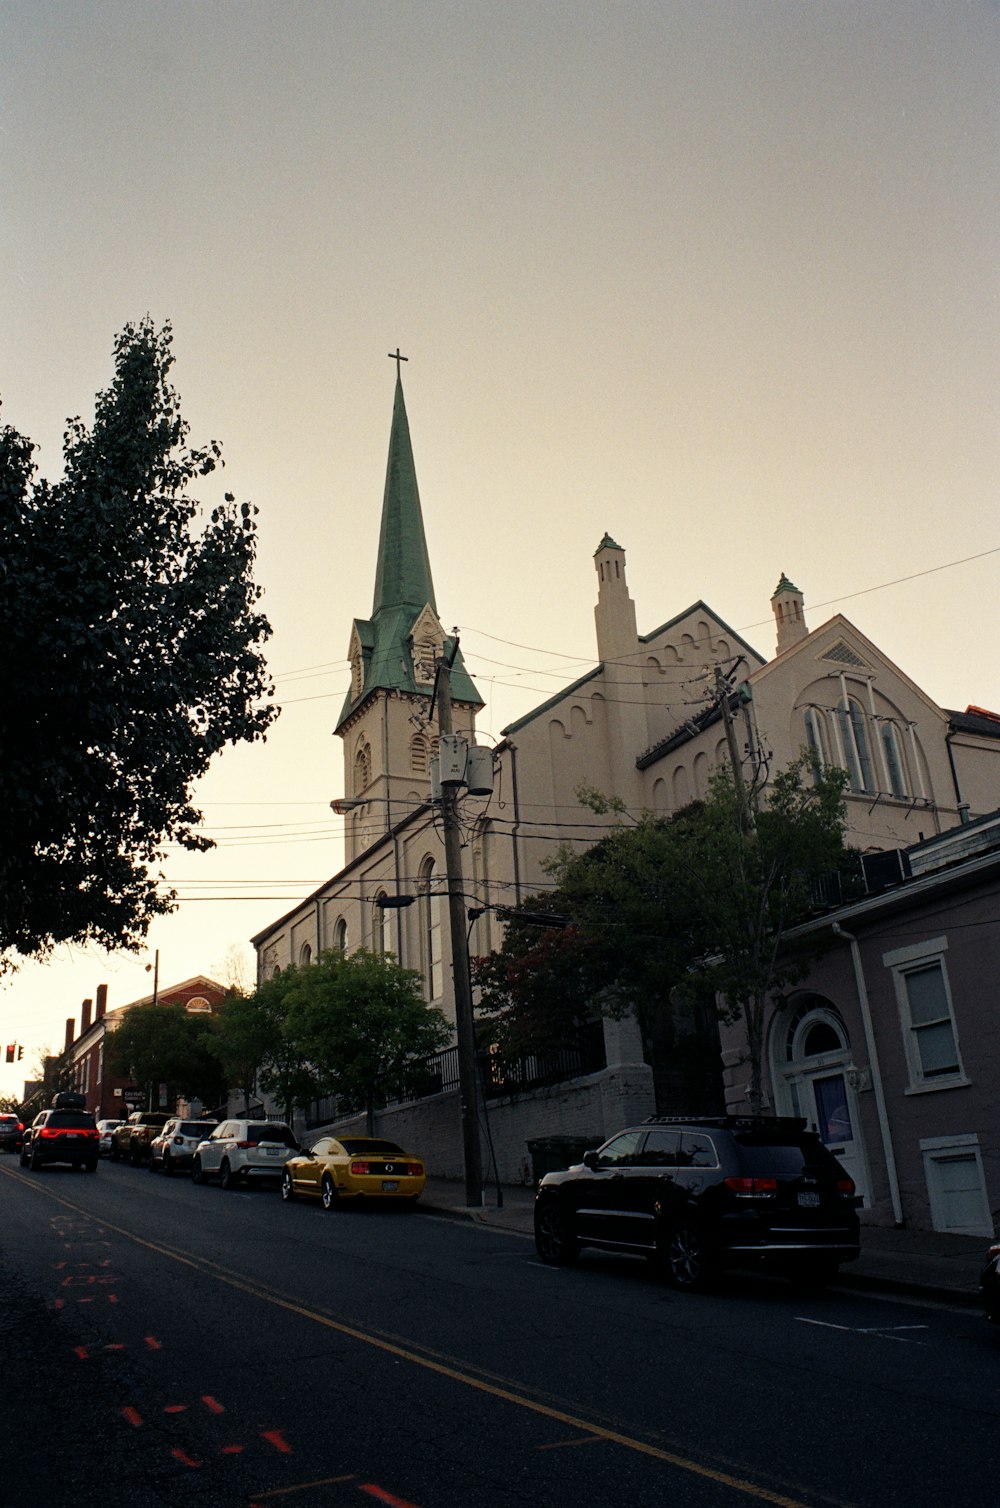 a city street with a church steeple in the background